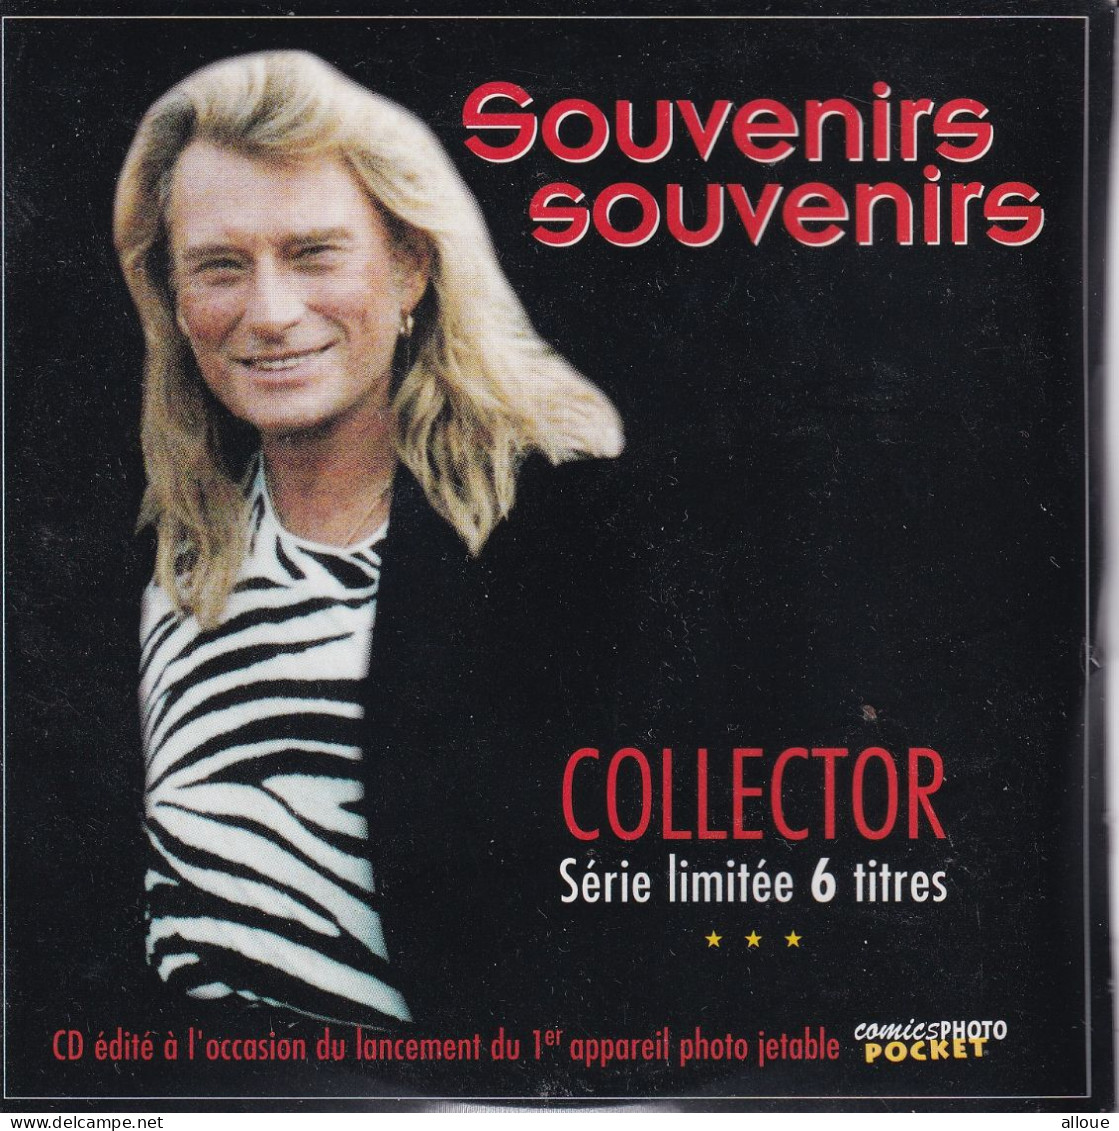 JOHNNY HALLYDAY SOUVENIRS SOUVENIRS - CD COLLECTOR SERIE LIMITEE 6 TITRES - Other - French Music